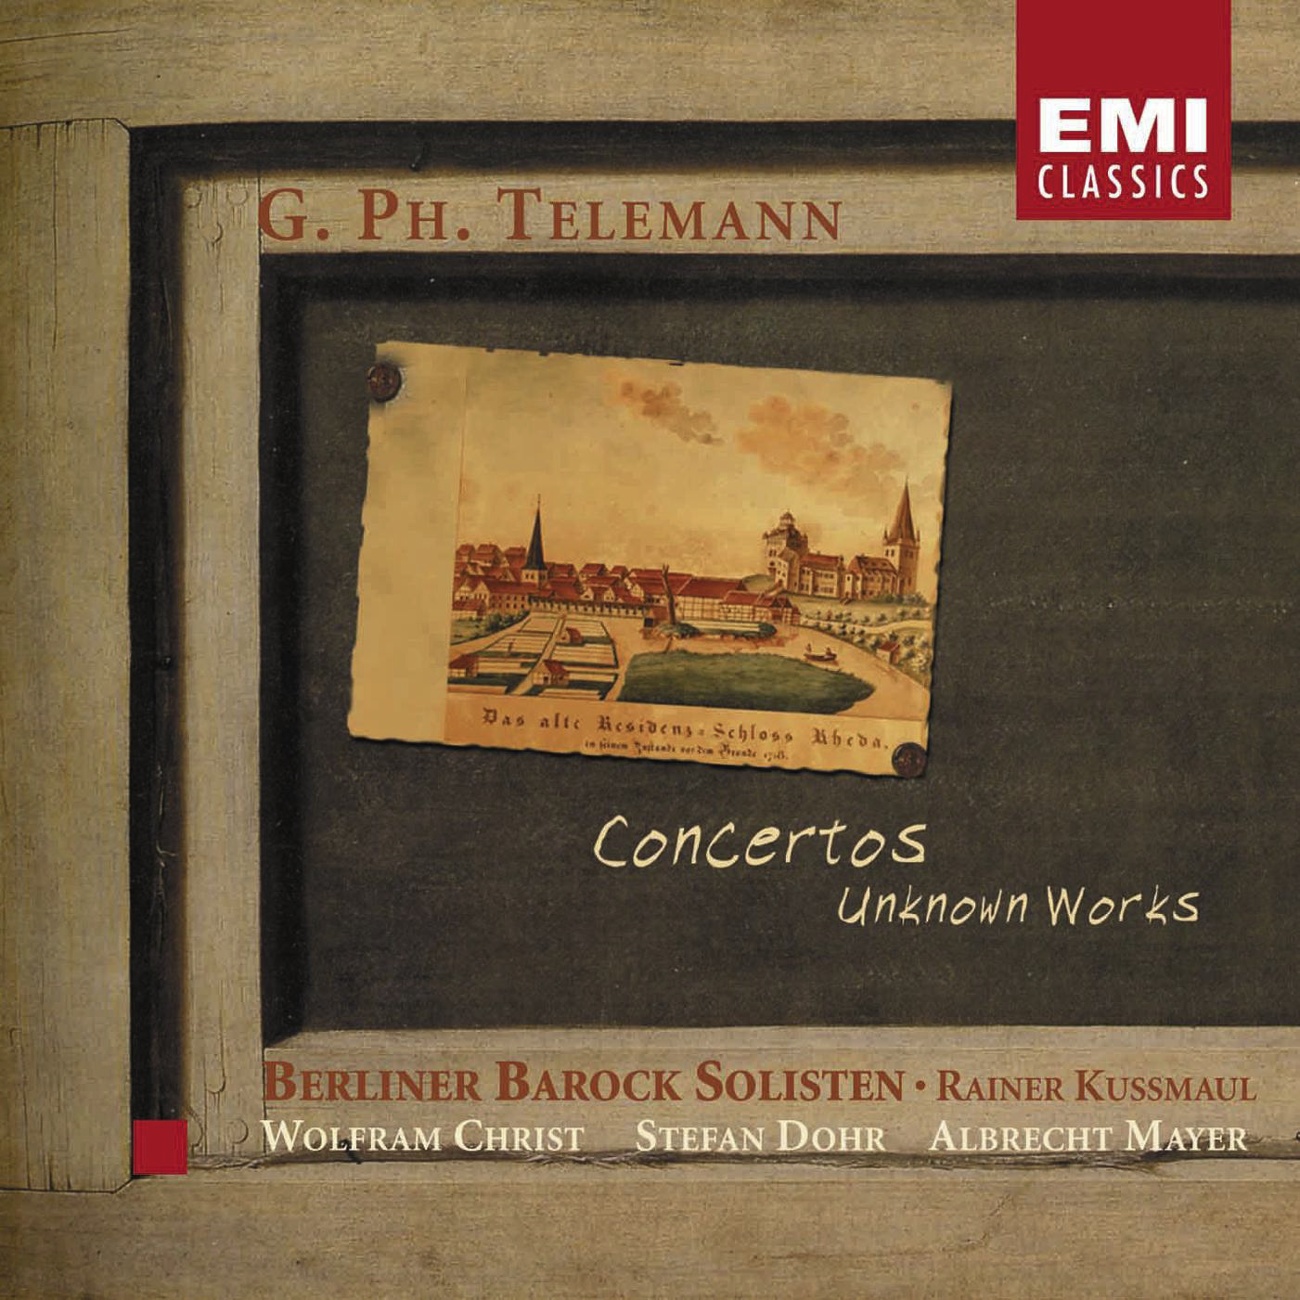 Concerto for Viola, Strings and basso continuo in G:allegro